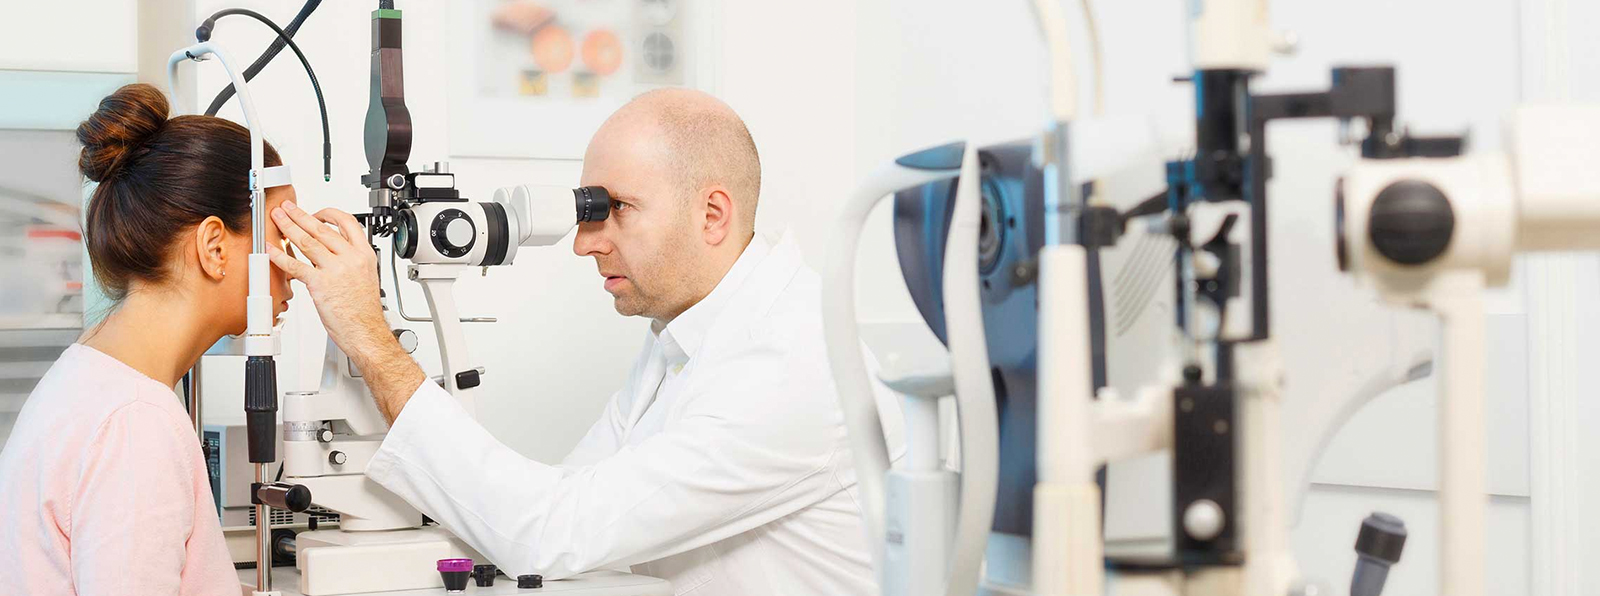 Laser Eye Surgery Clinic in Perth